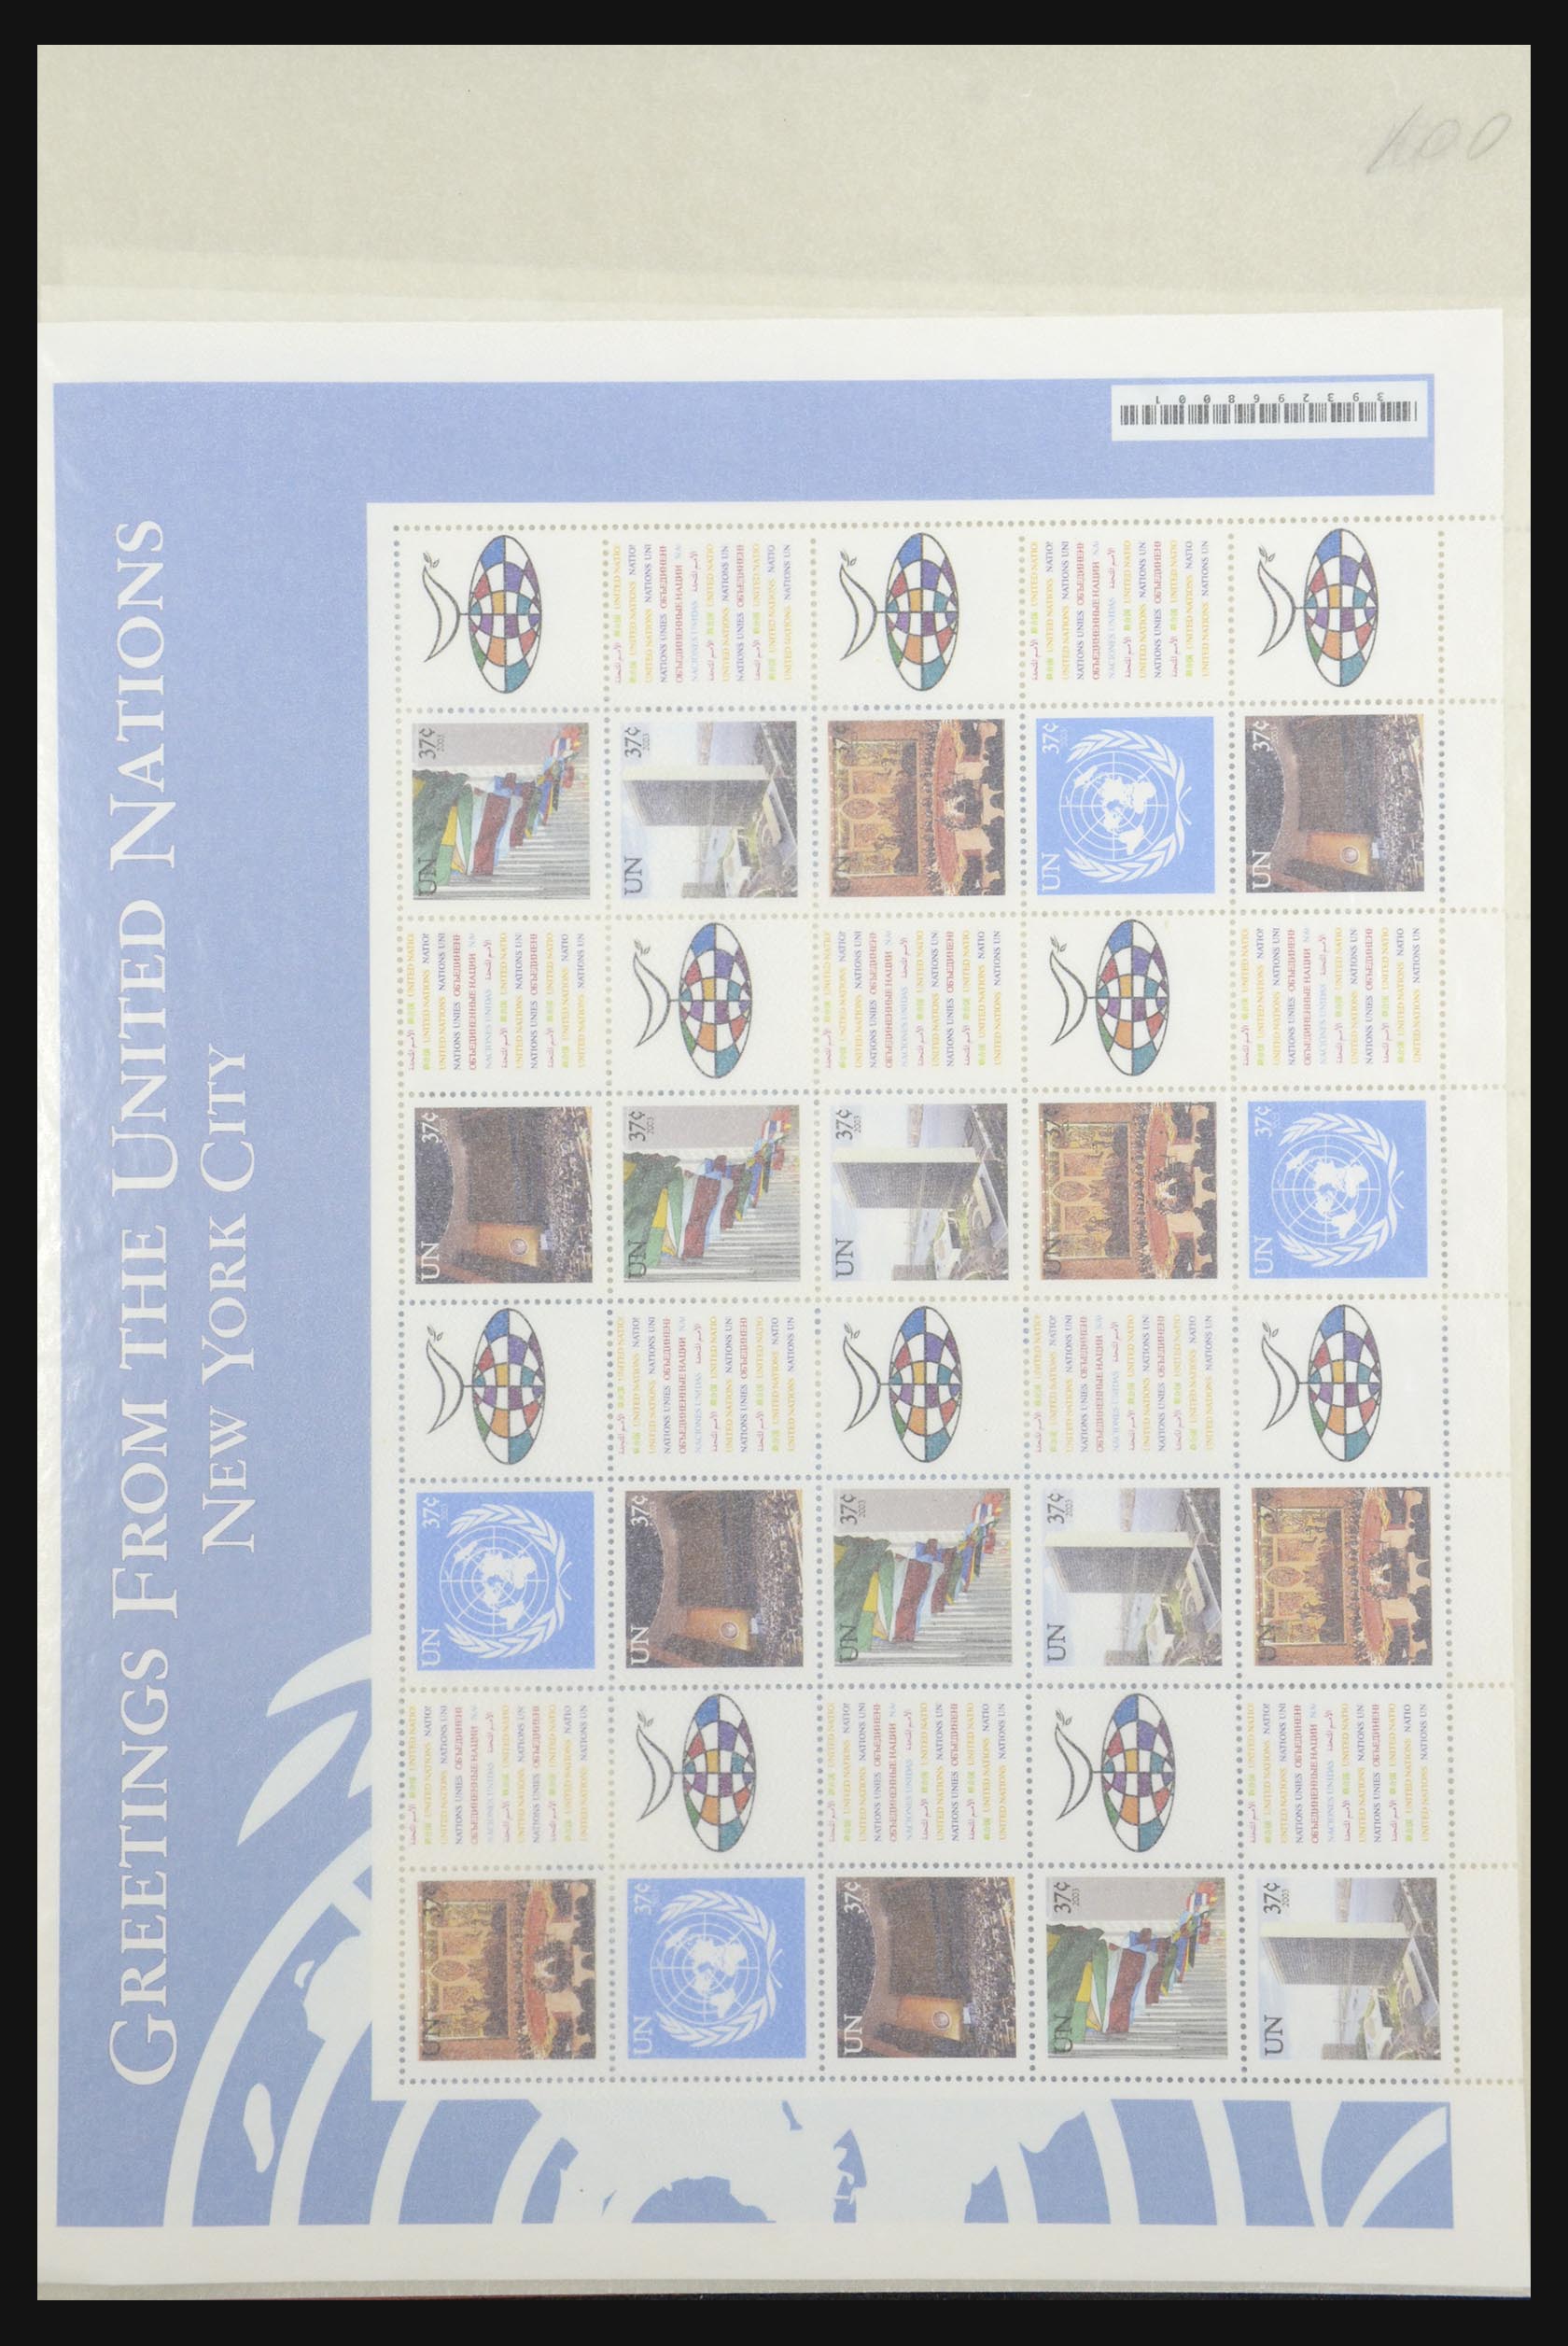 31674 001 - 31674 United Nations personalised sheetlets 2003-2012.